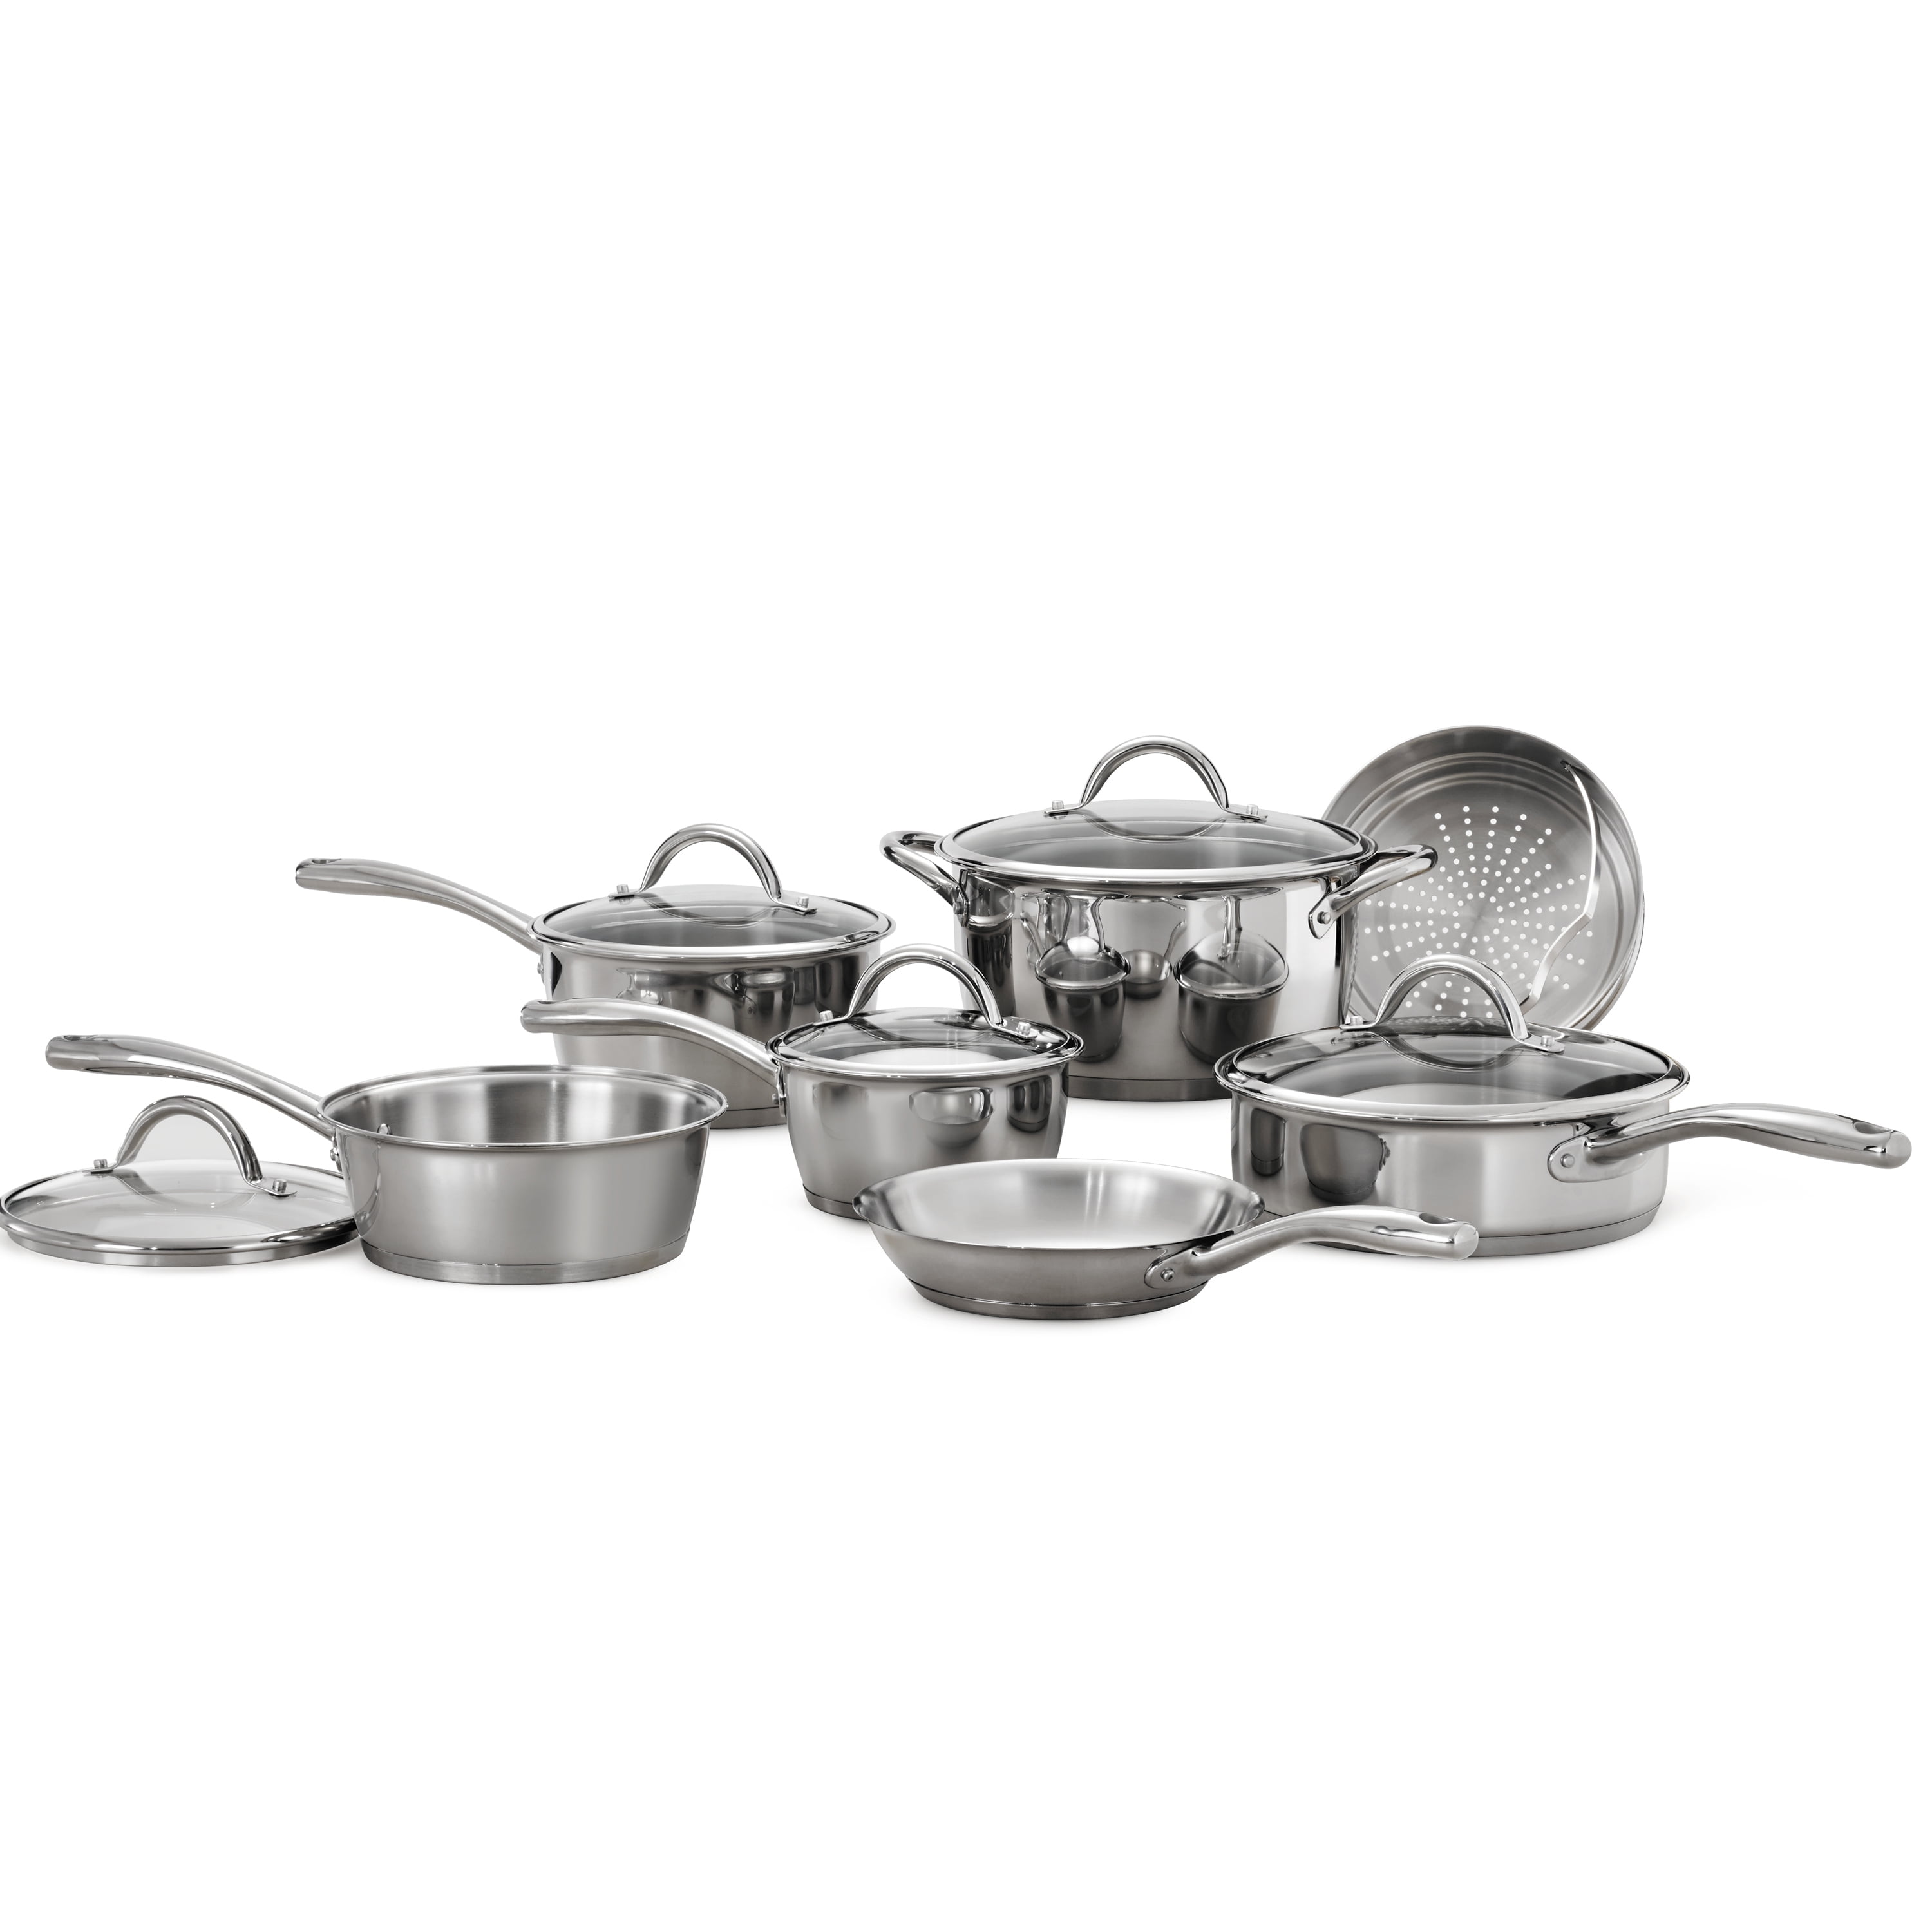 Cuisinart Chef's Classic Stainless Steel 14 Pc Set for sale online 